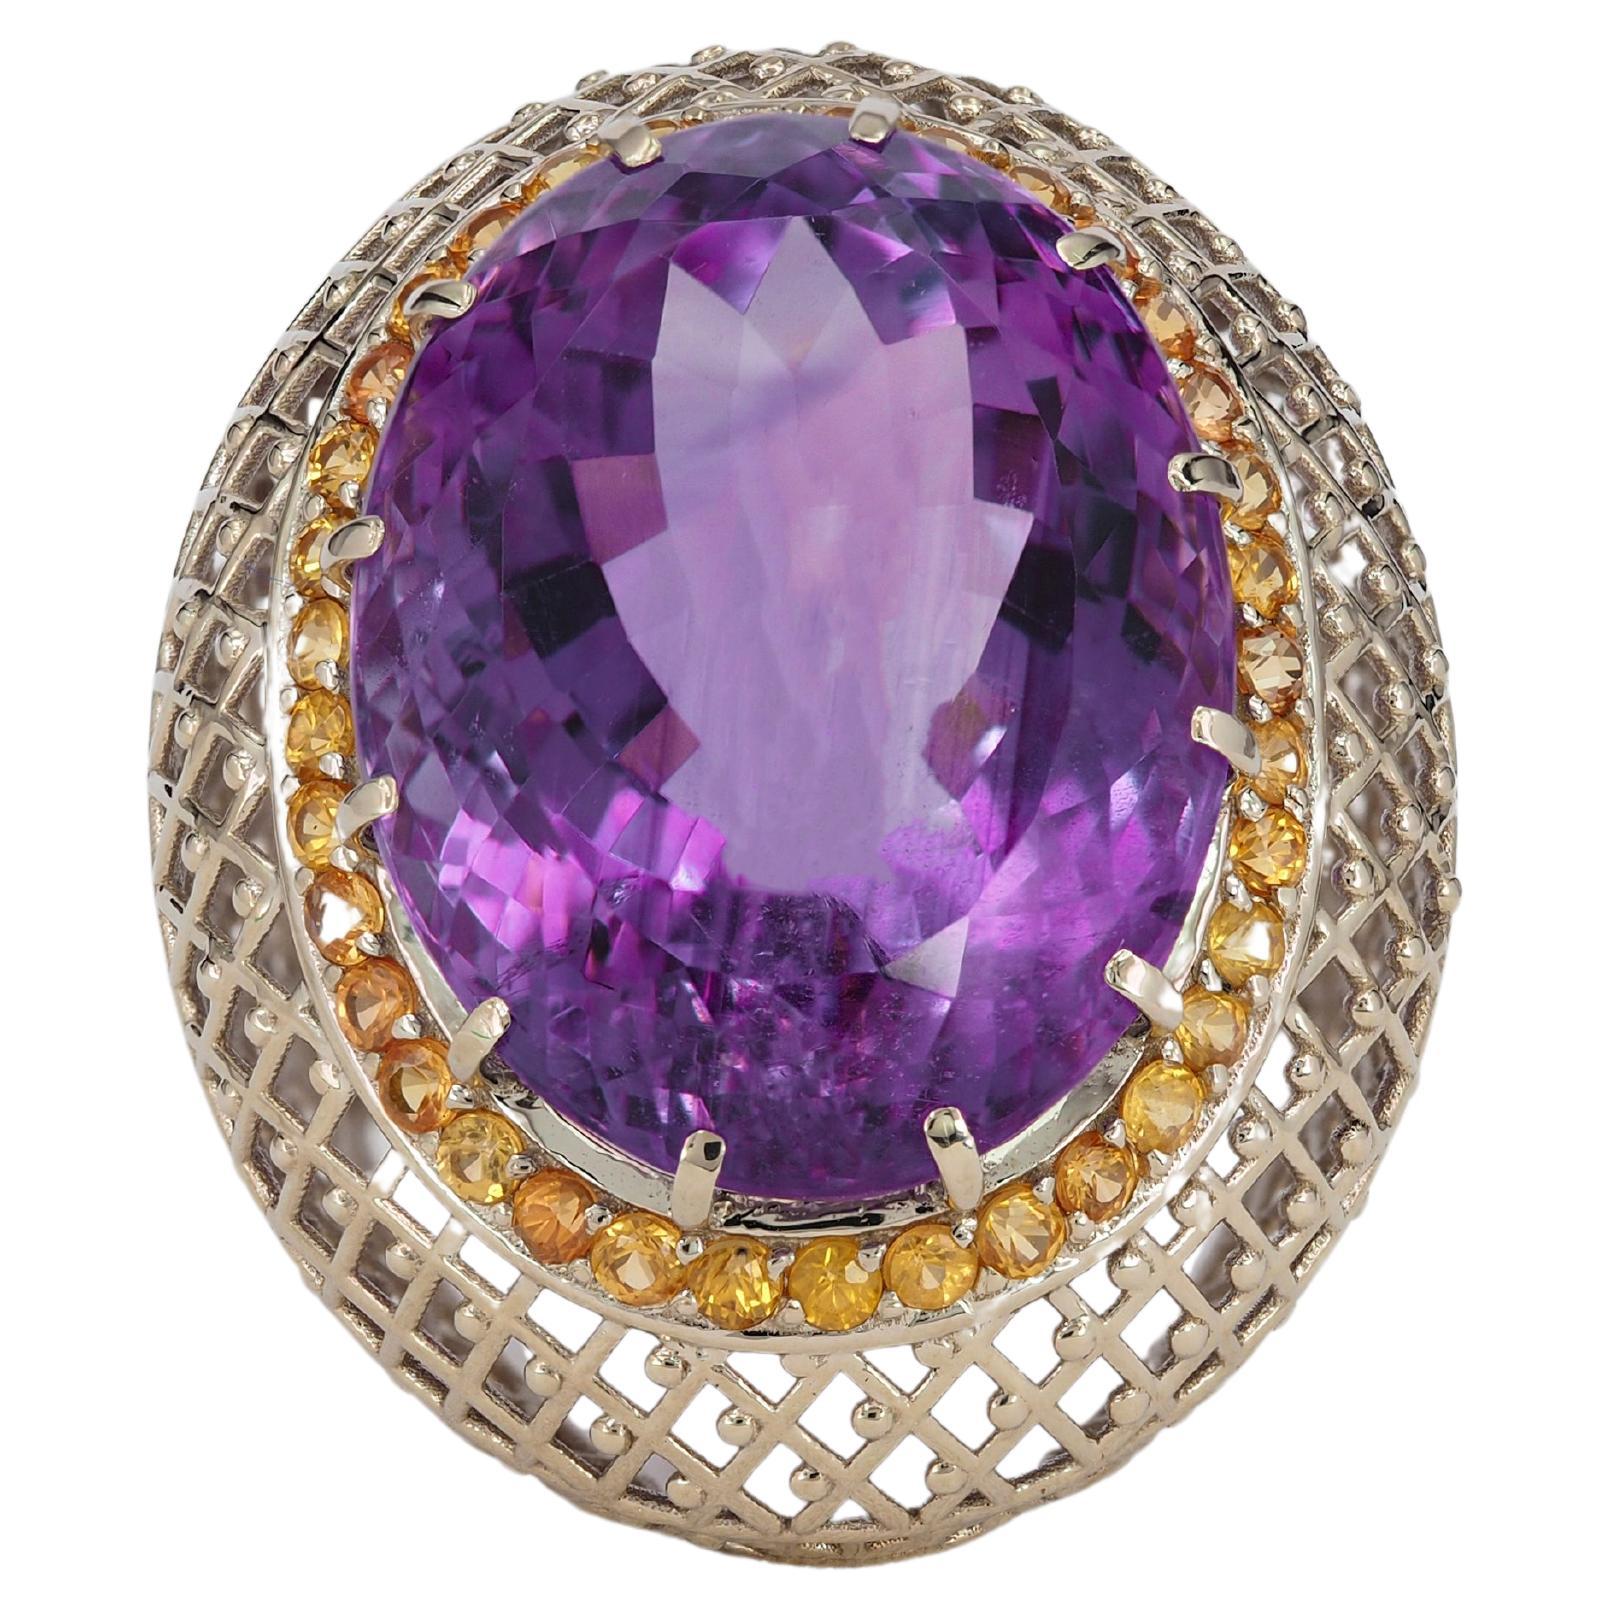 Oval cut amethyst cocktail ring with sapphires